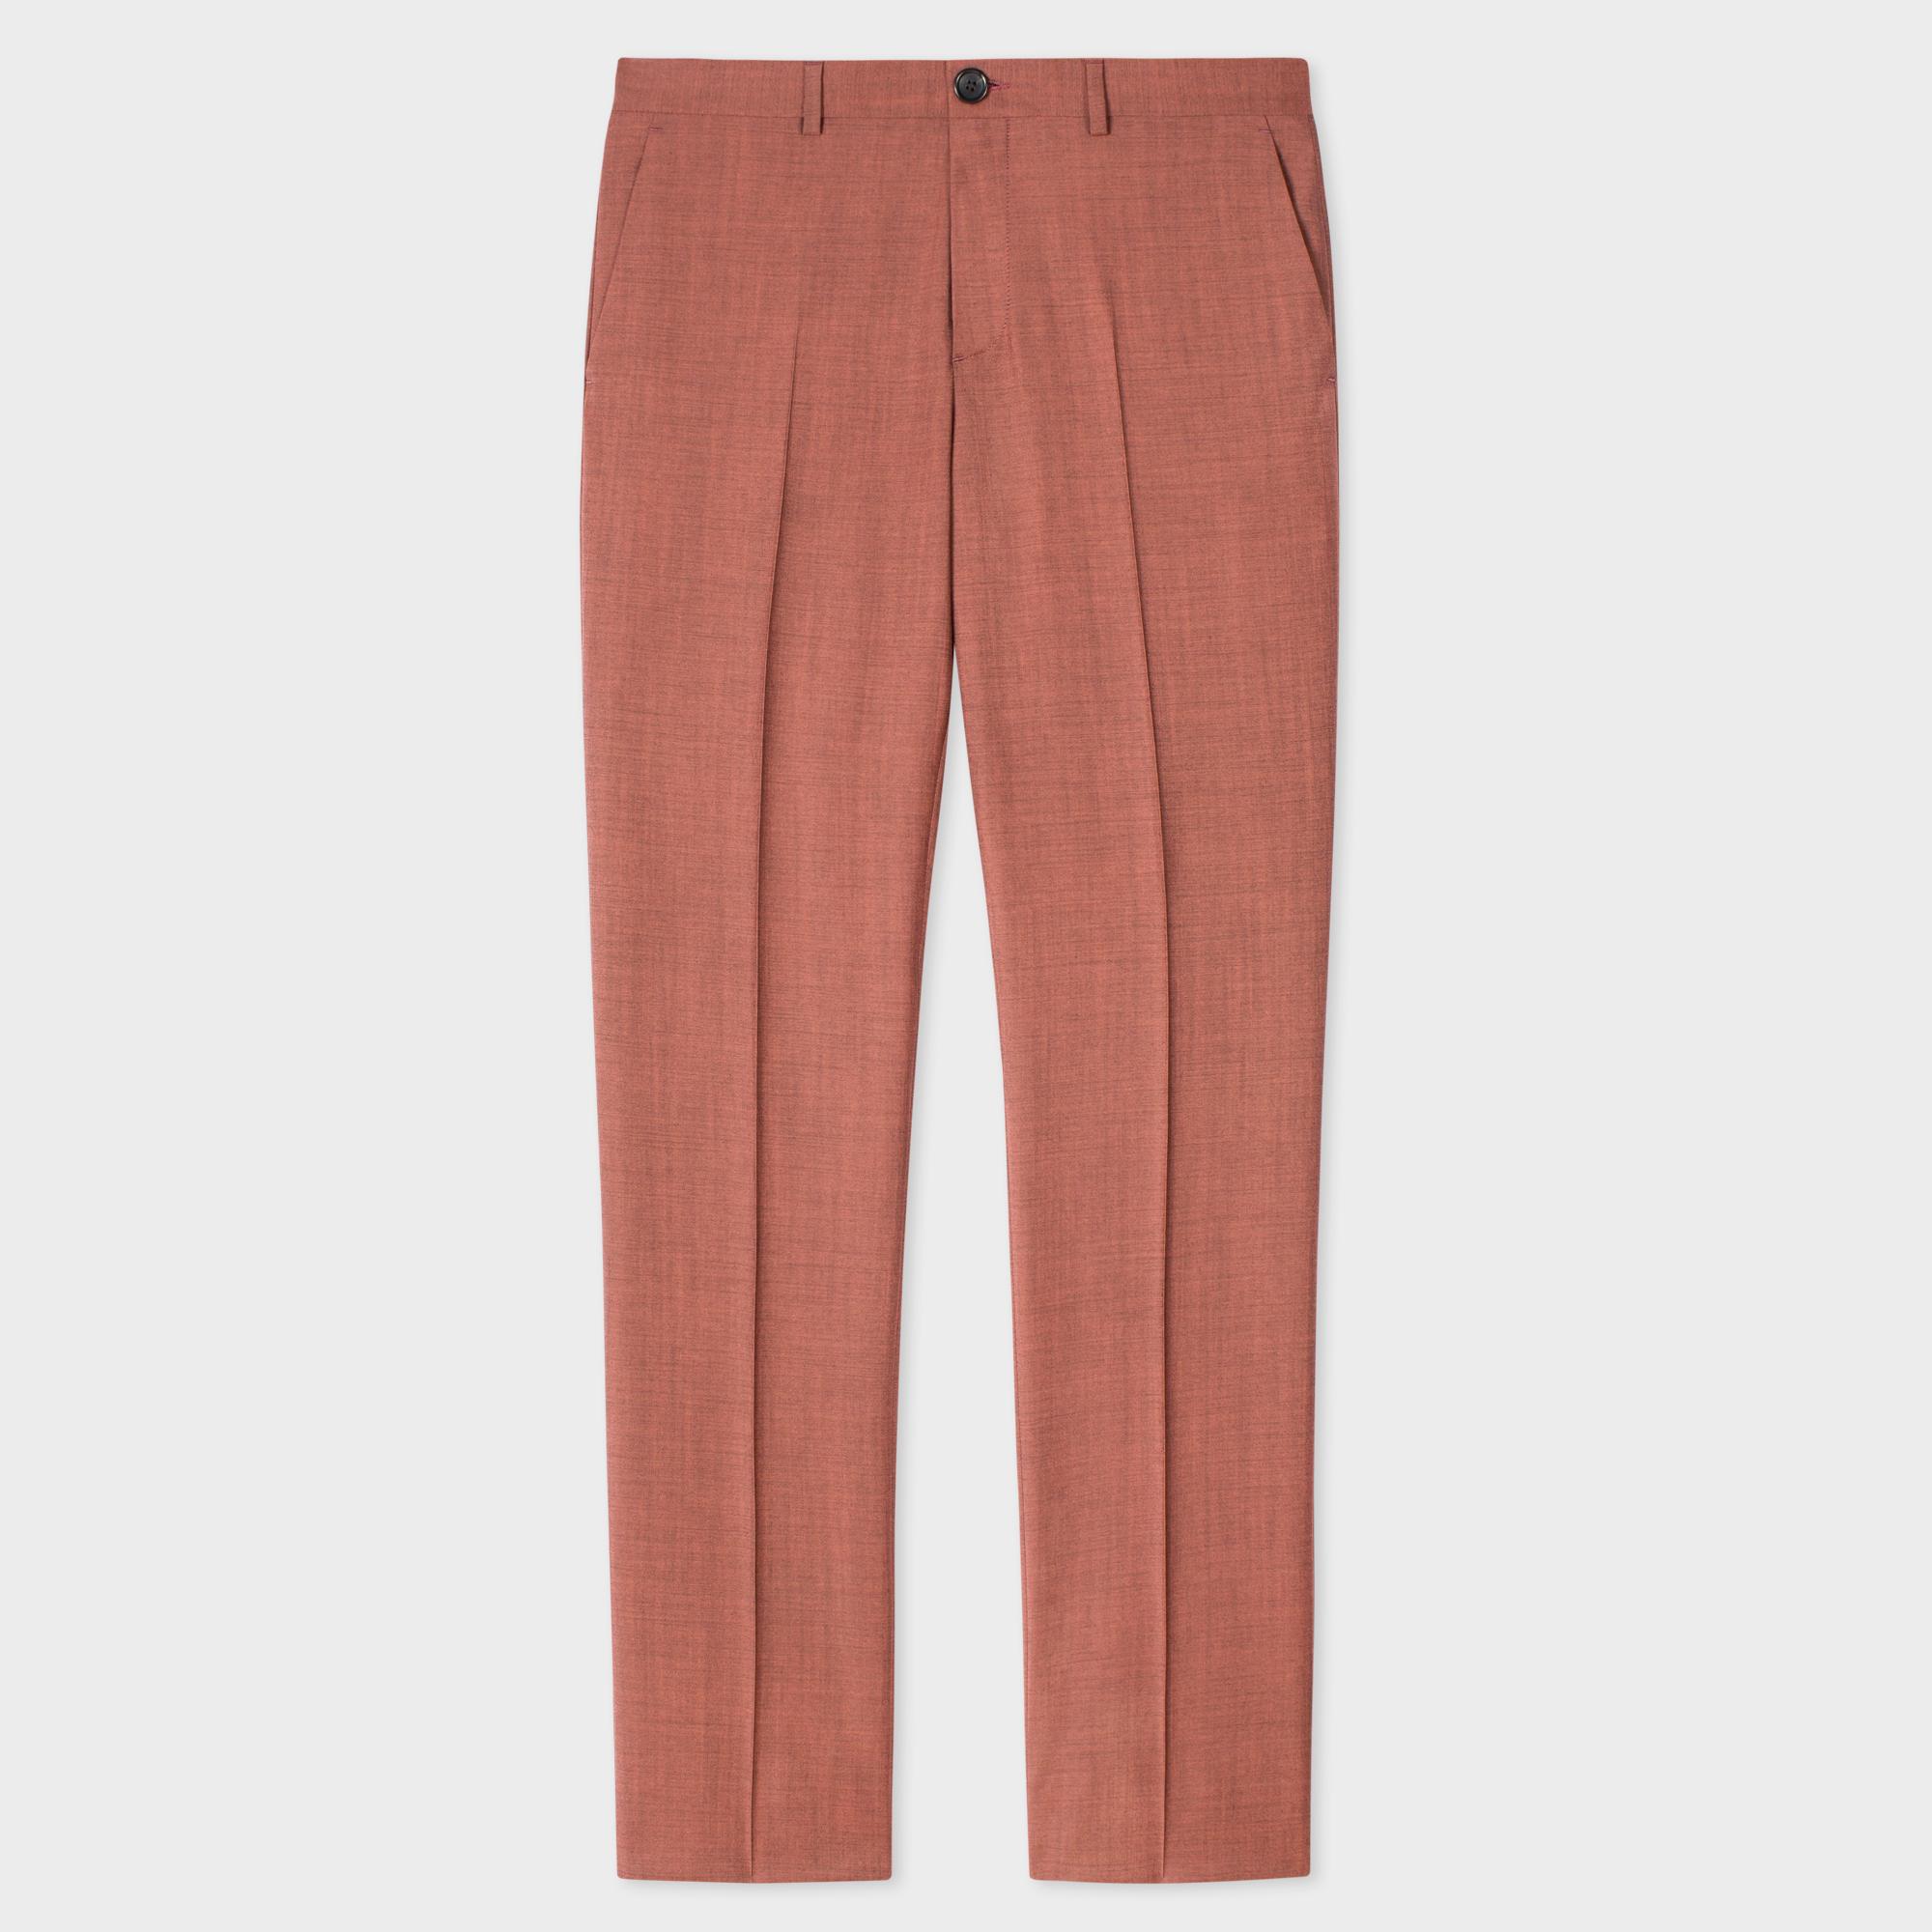 Paul Smith Men's Mid-fit Coral Wool-mohair Trousers in Pink for Men - Lyst